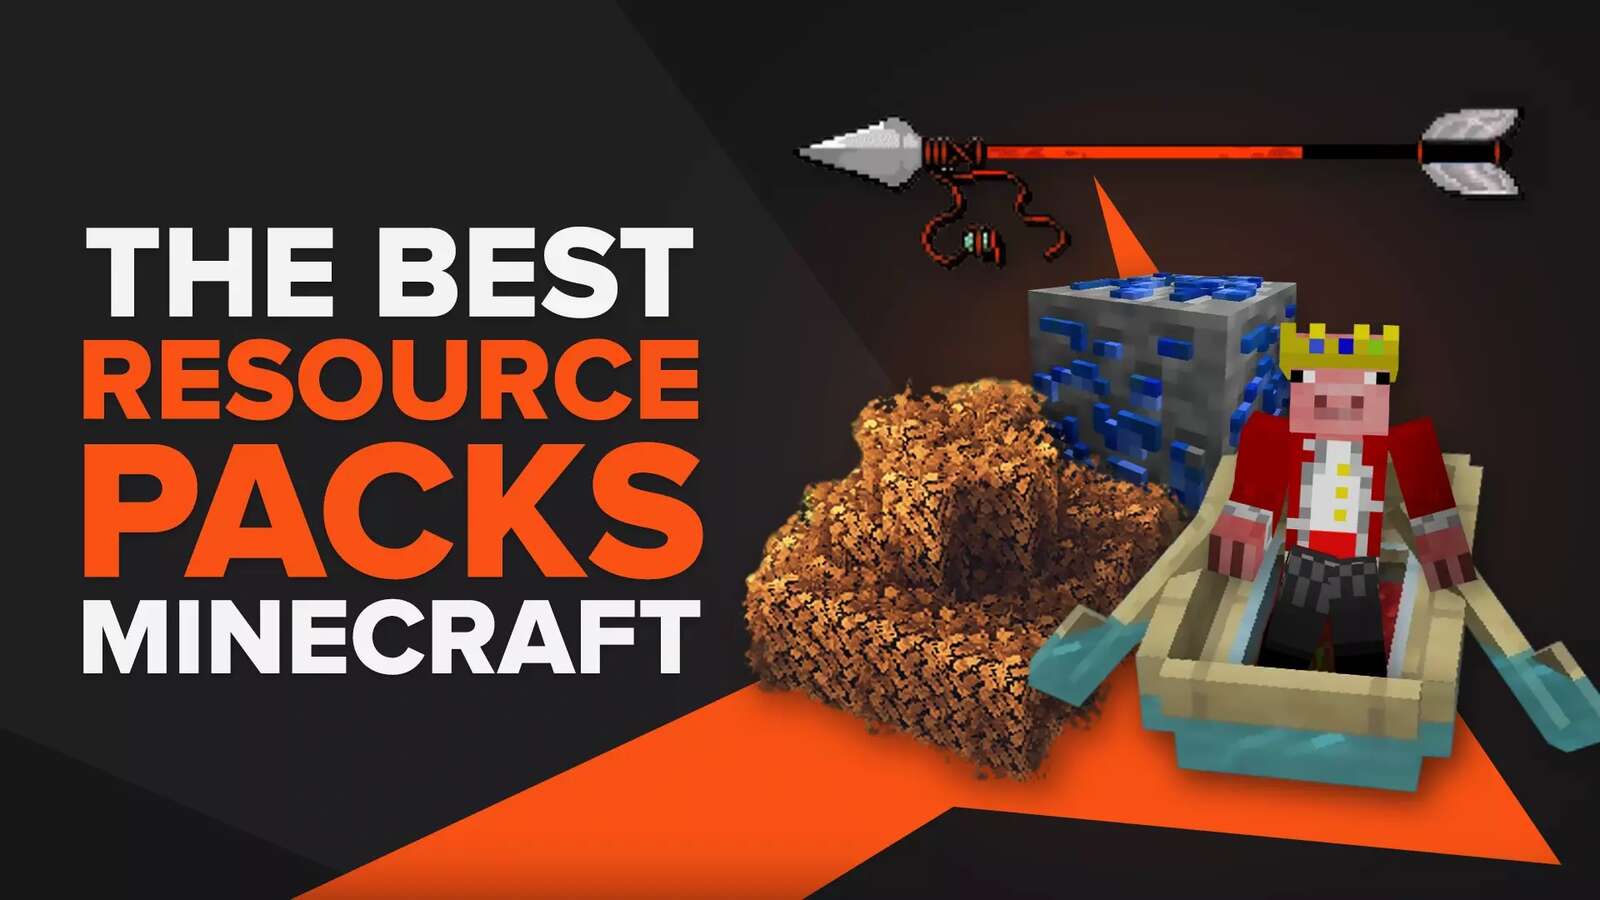 Top 10 Best Resource Packs to Get For Minecraft